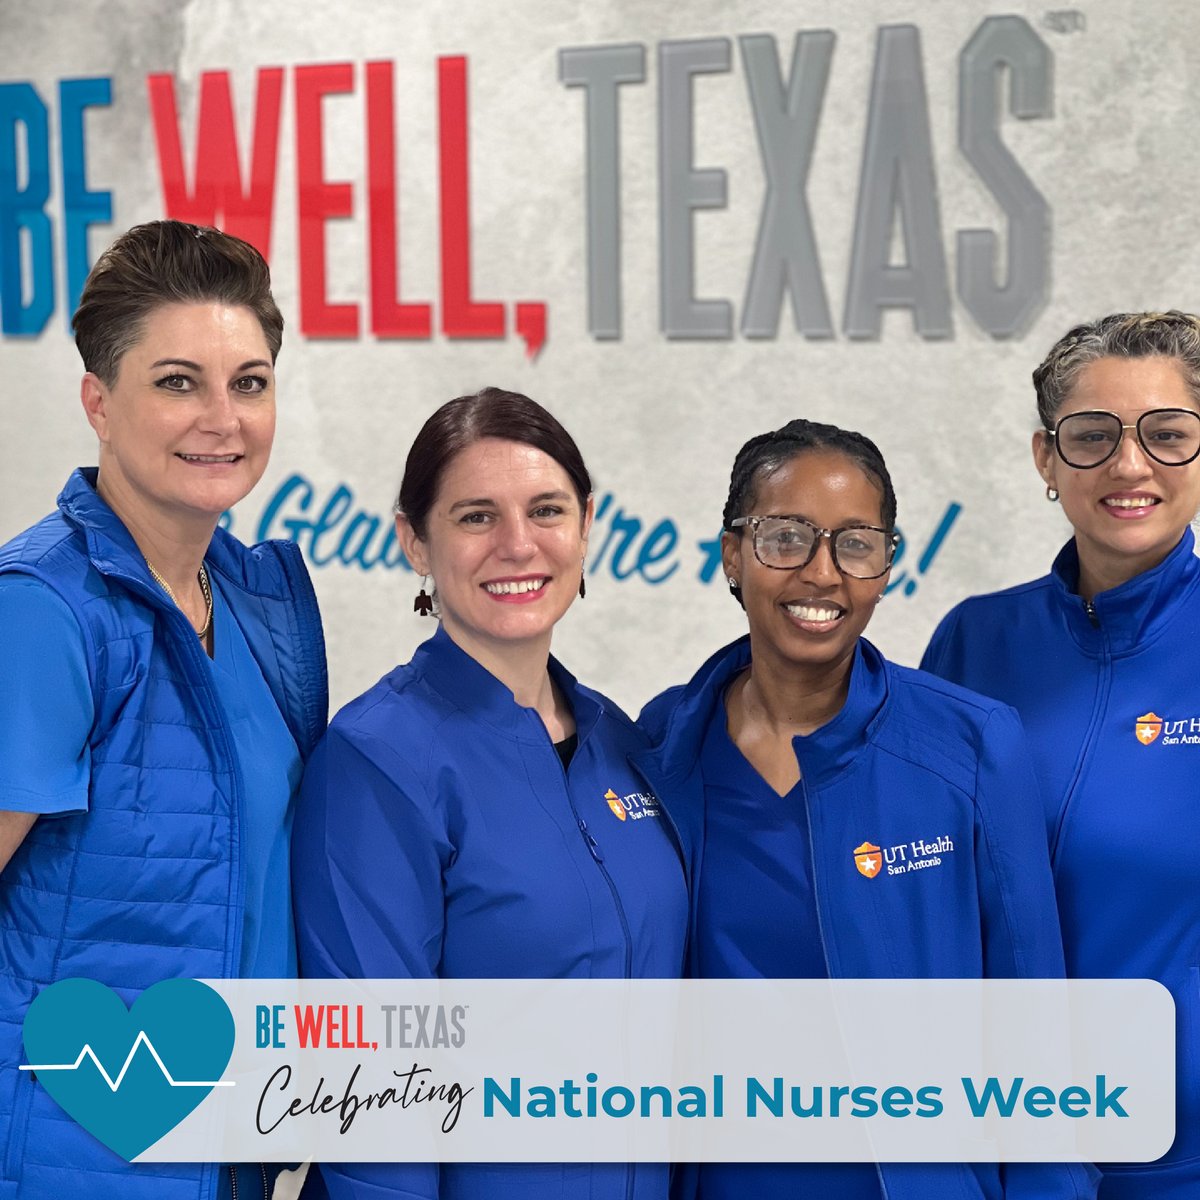 Happy #NationalNursesWeek! 💙🩺 We want to give a special shoutout to our wonderful nurse practitioners, Dr. Broussard, Dr. Dyer & Valentina, and our licensed vocational nurses Chiarra & Krystal! All work tirelessly to provide care to our patients on their journey to recovery!